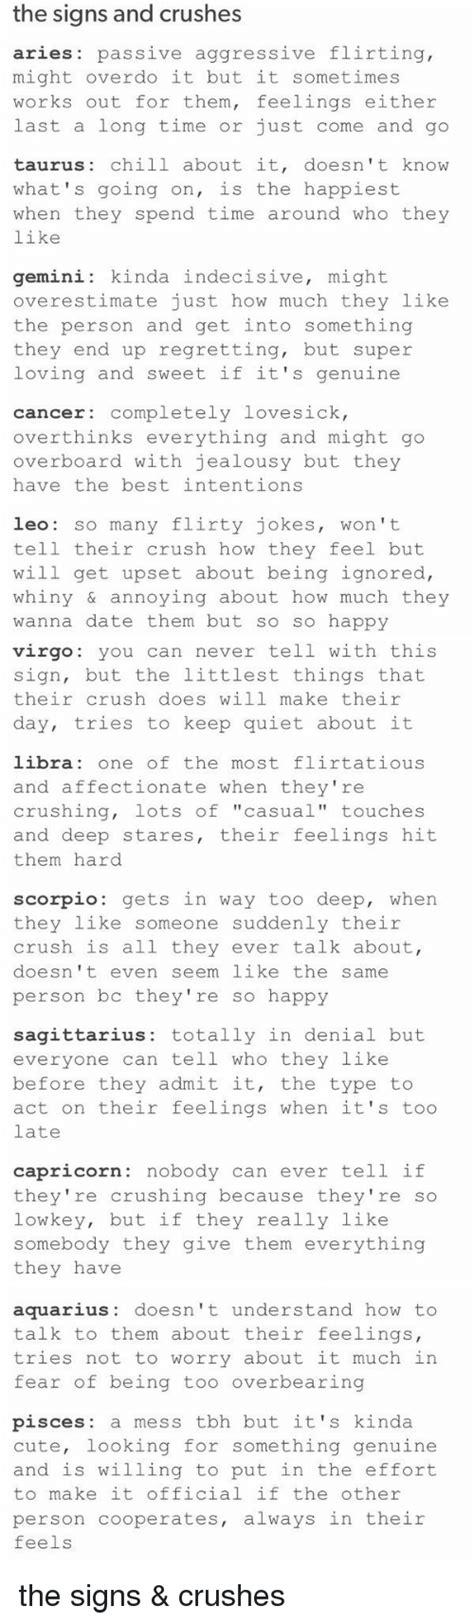 the signs and crushes aries passive aggressive flirting might overdo it